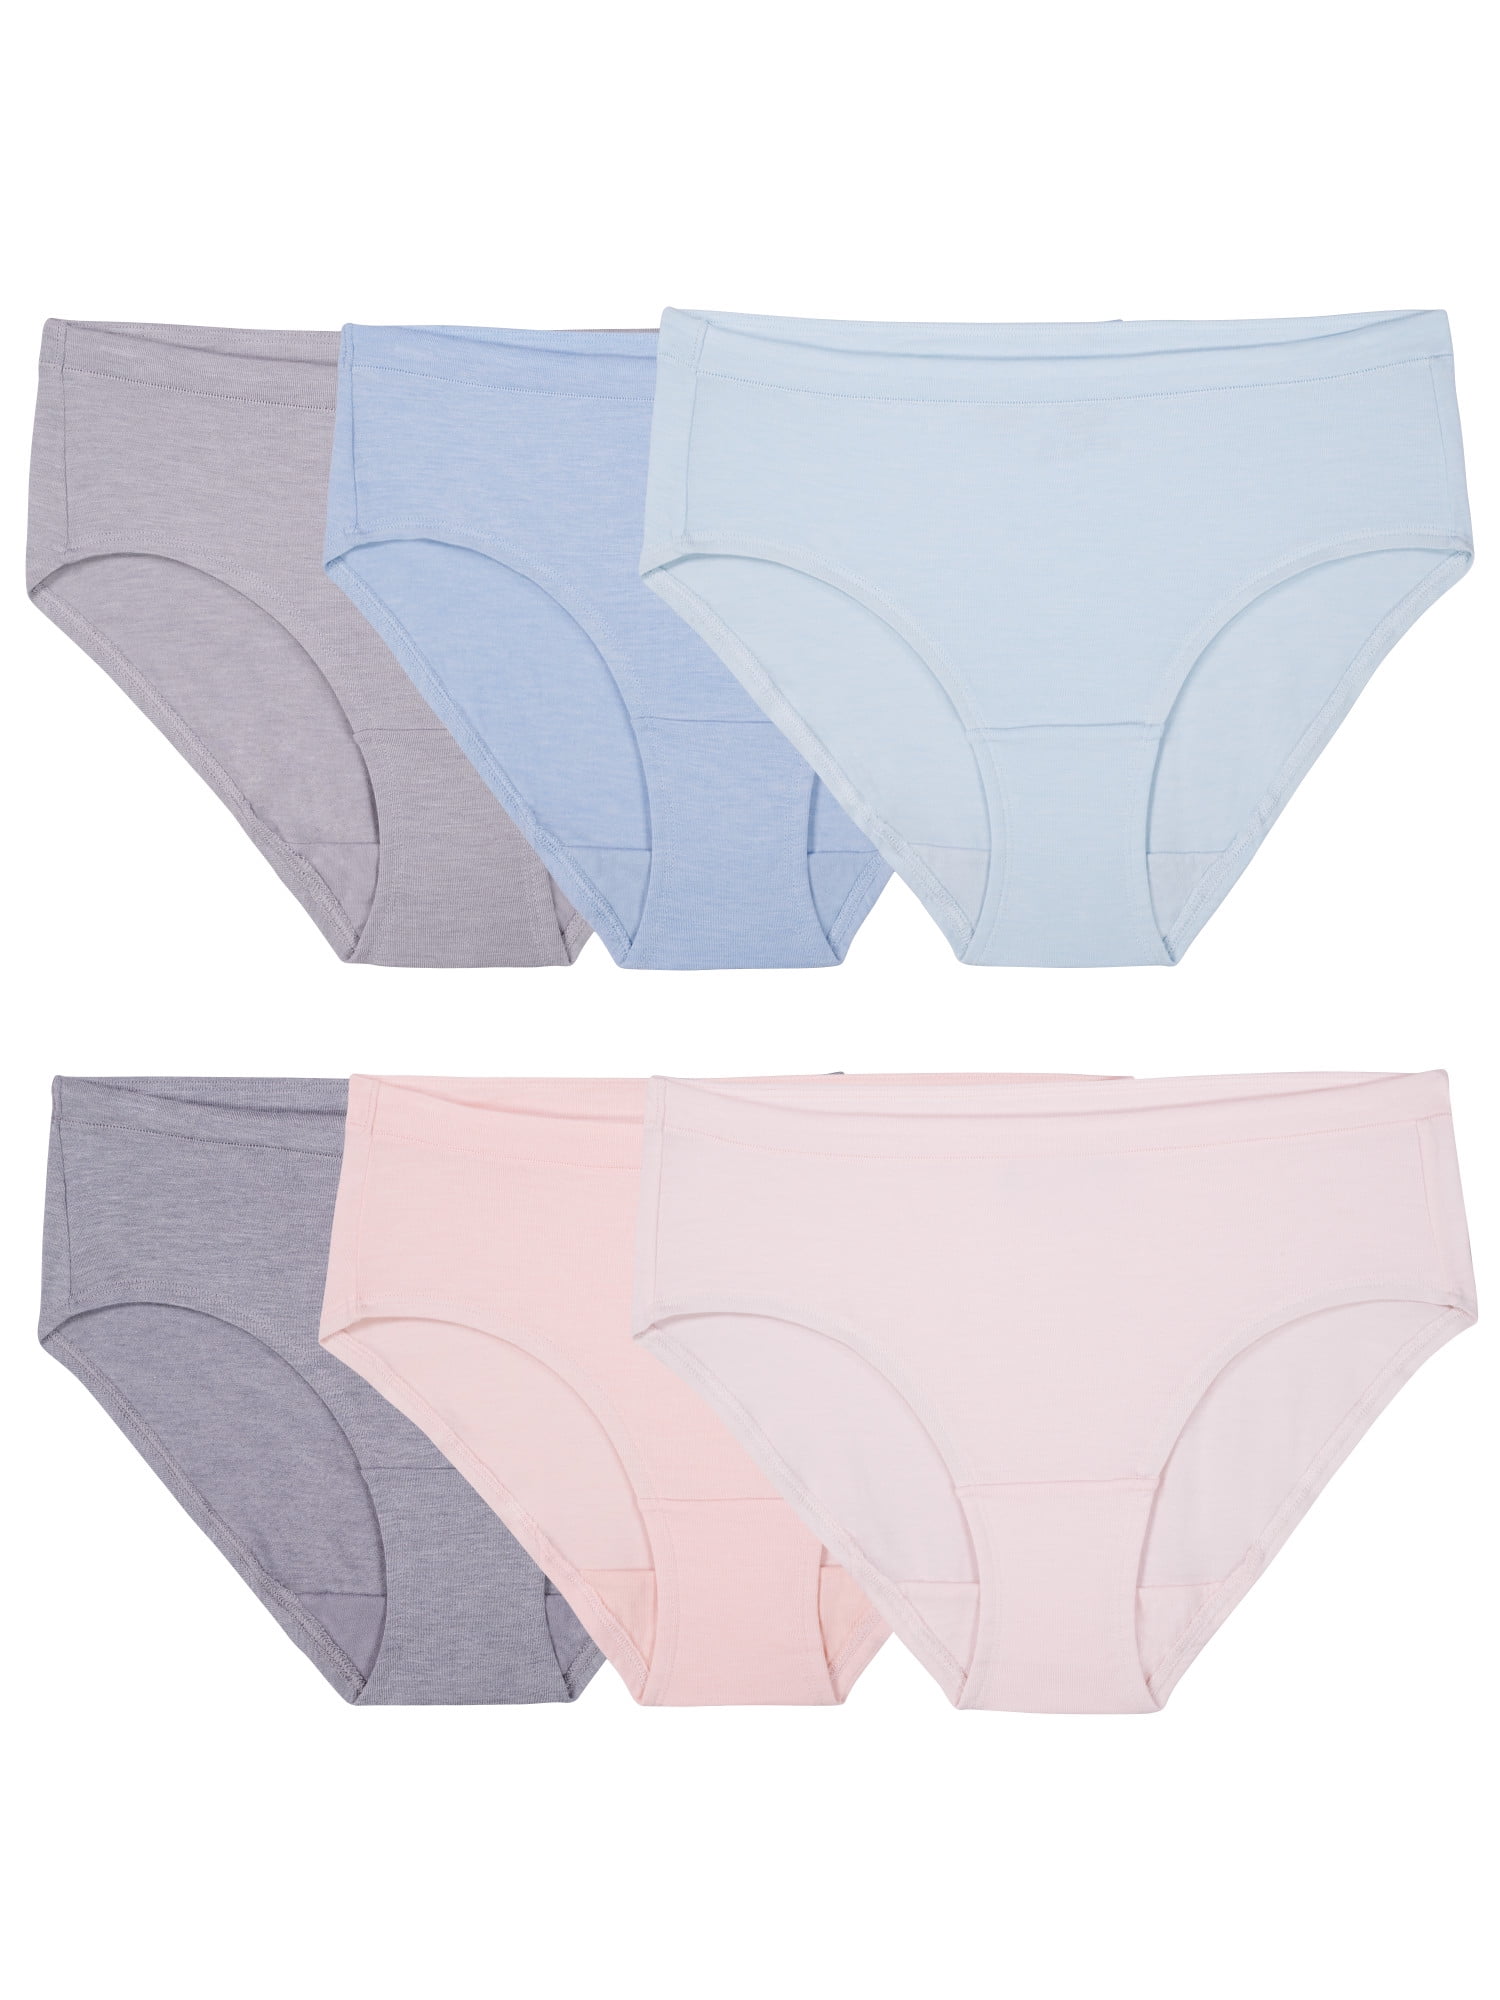 INNERSY Girls' Underwear Breathable Cotton Knickers Stripes Kids Pants  Fruits Underpants Multipack 5 (4-5 Years, Cute Light Colours) :  : Fashion